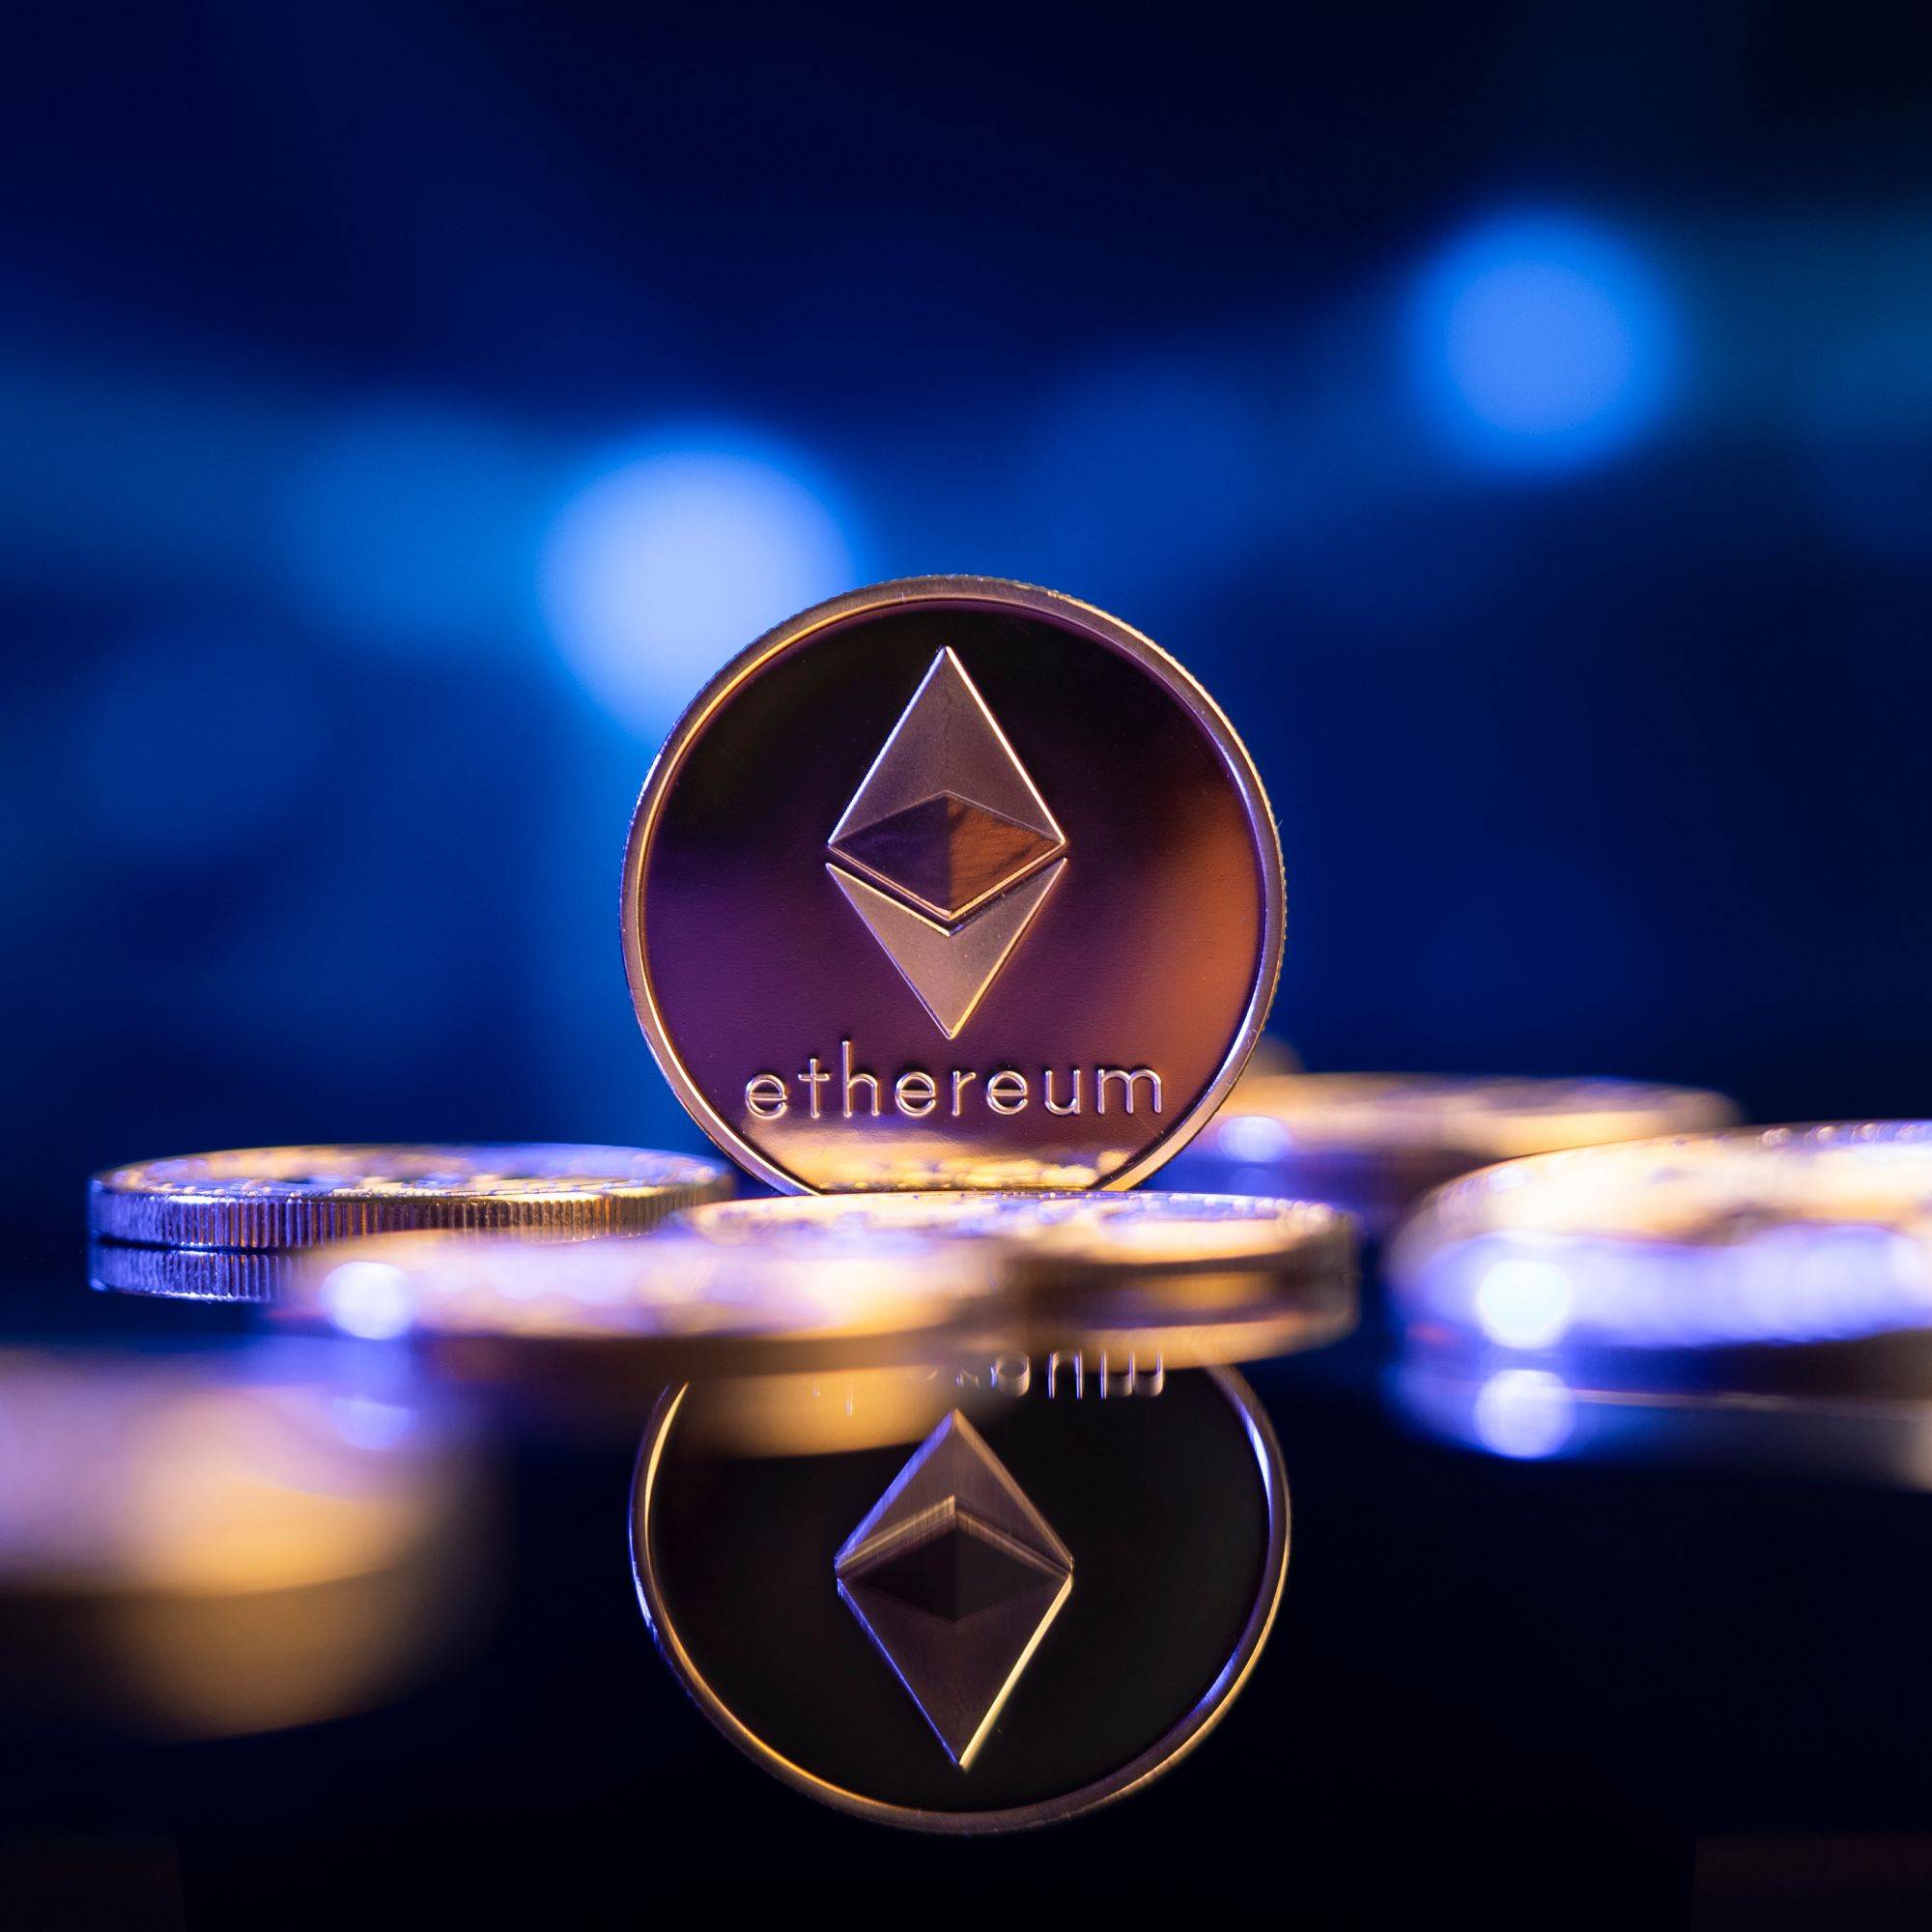 How to invest in Ethereum (ETH)